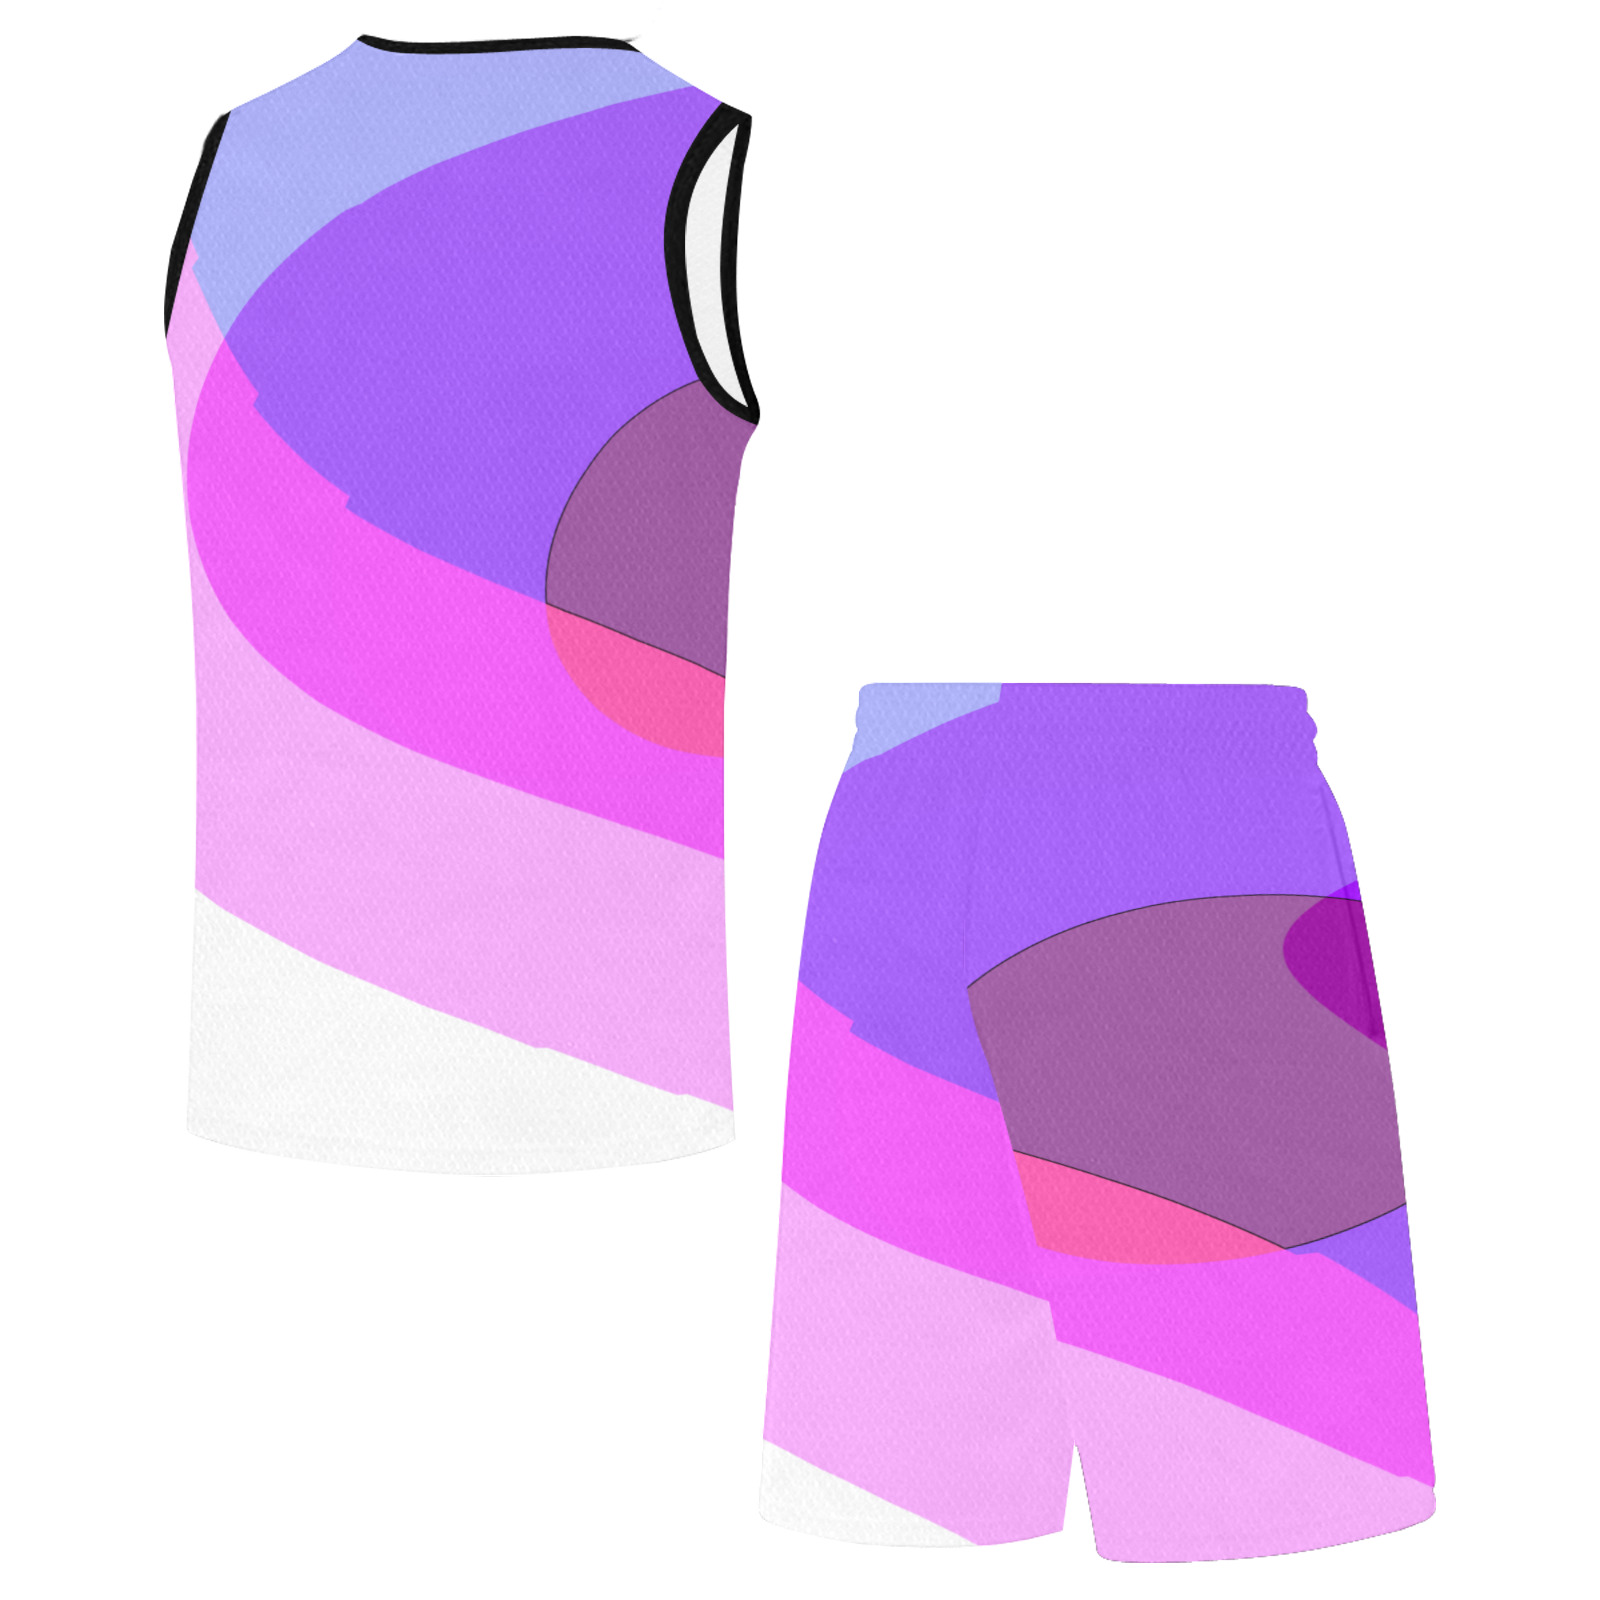 Purple Retro Groovy Abstract 409 Basketball Uniform with Pocket